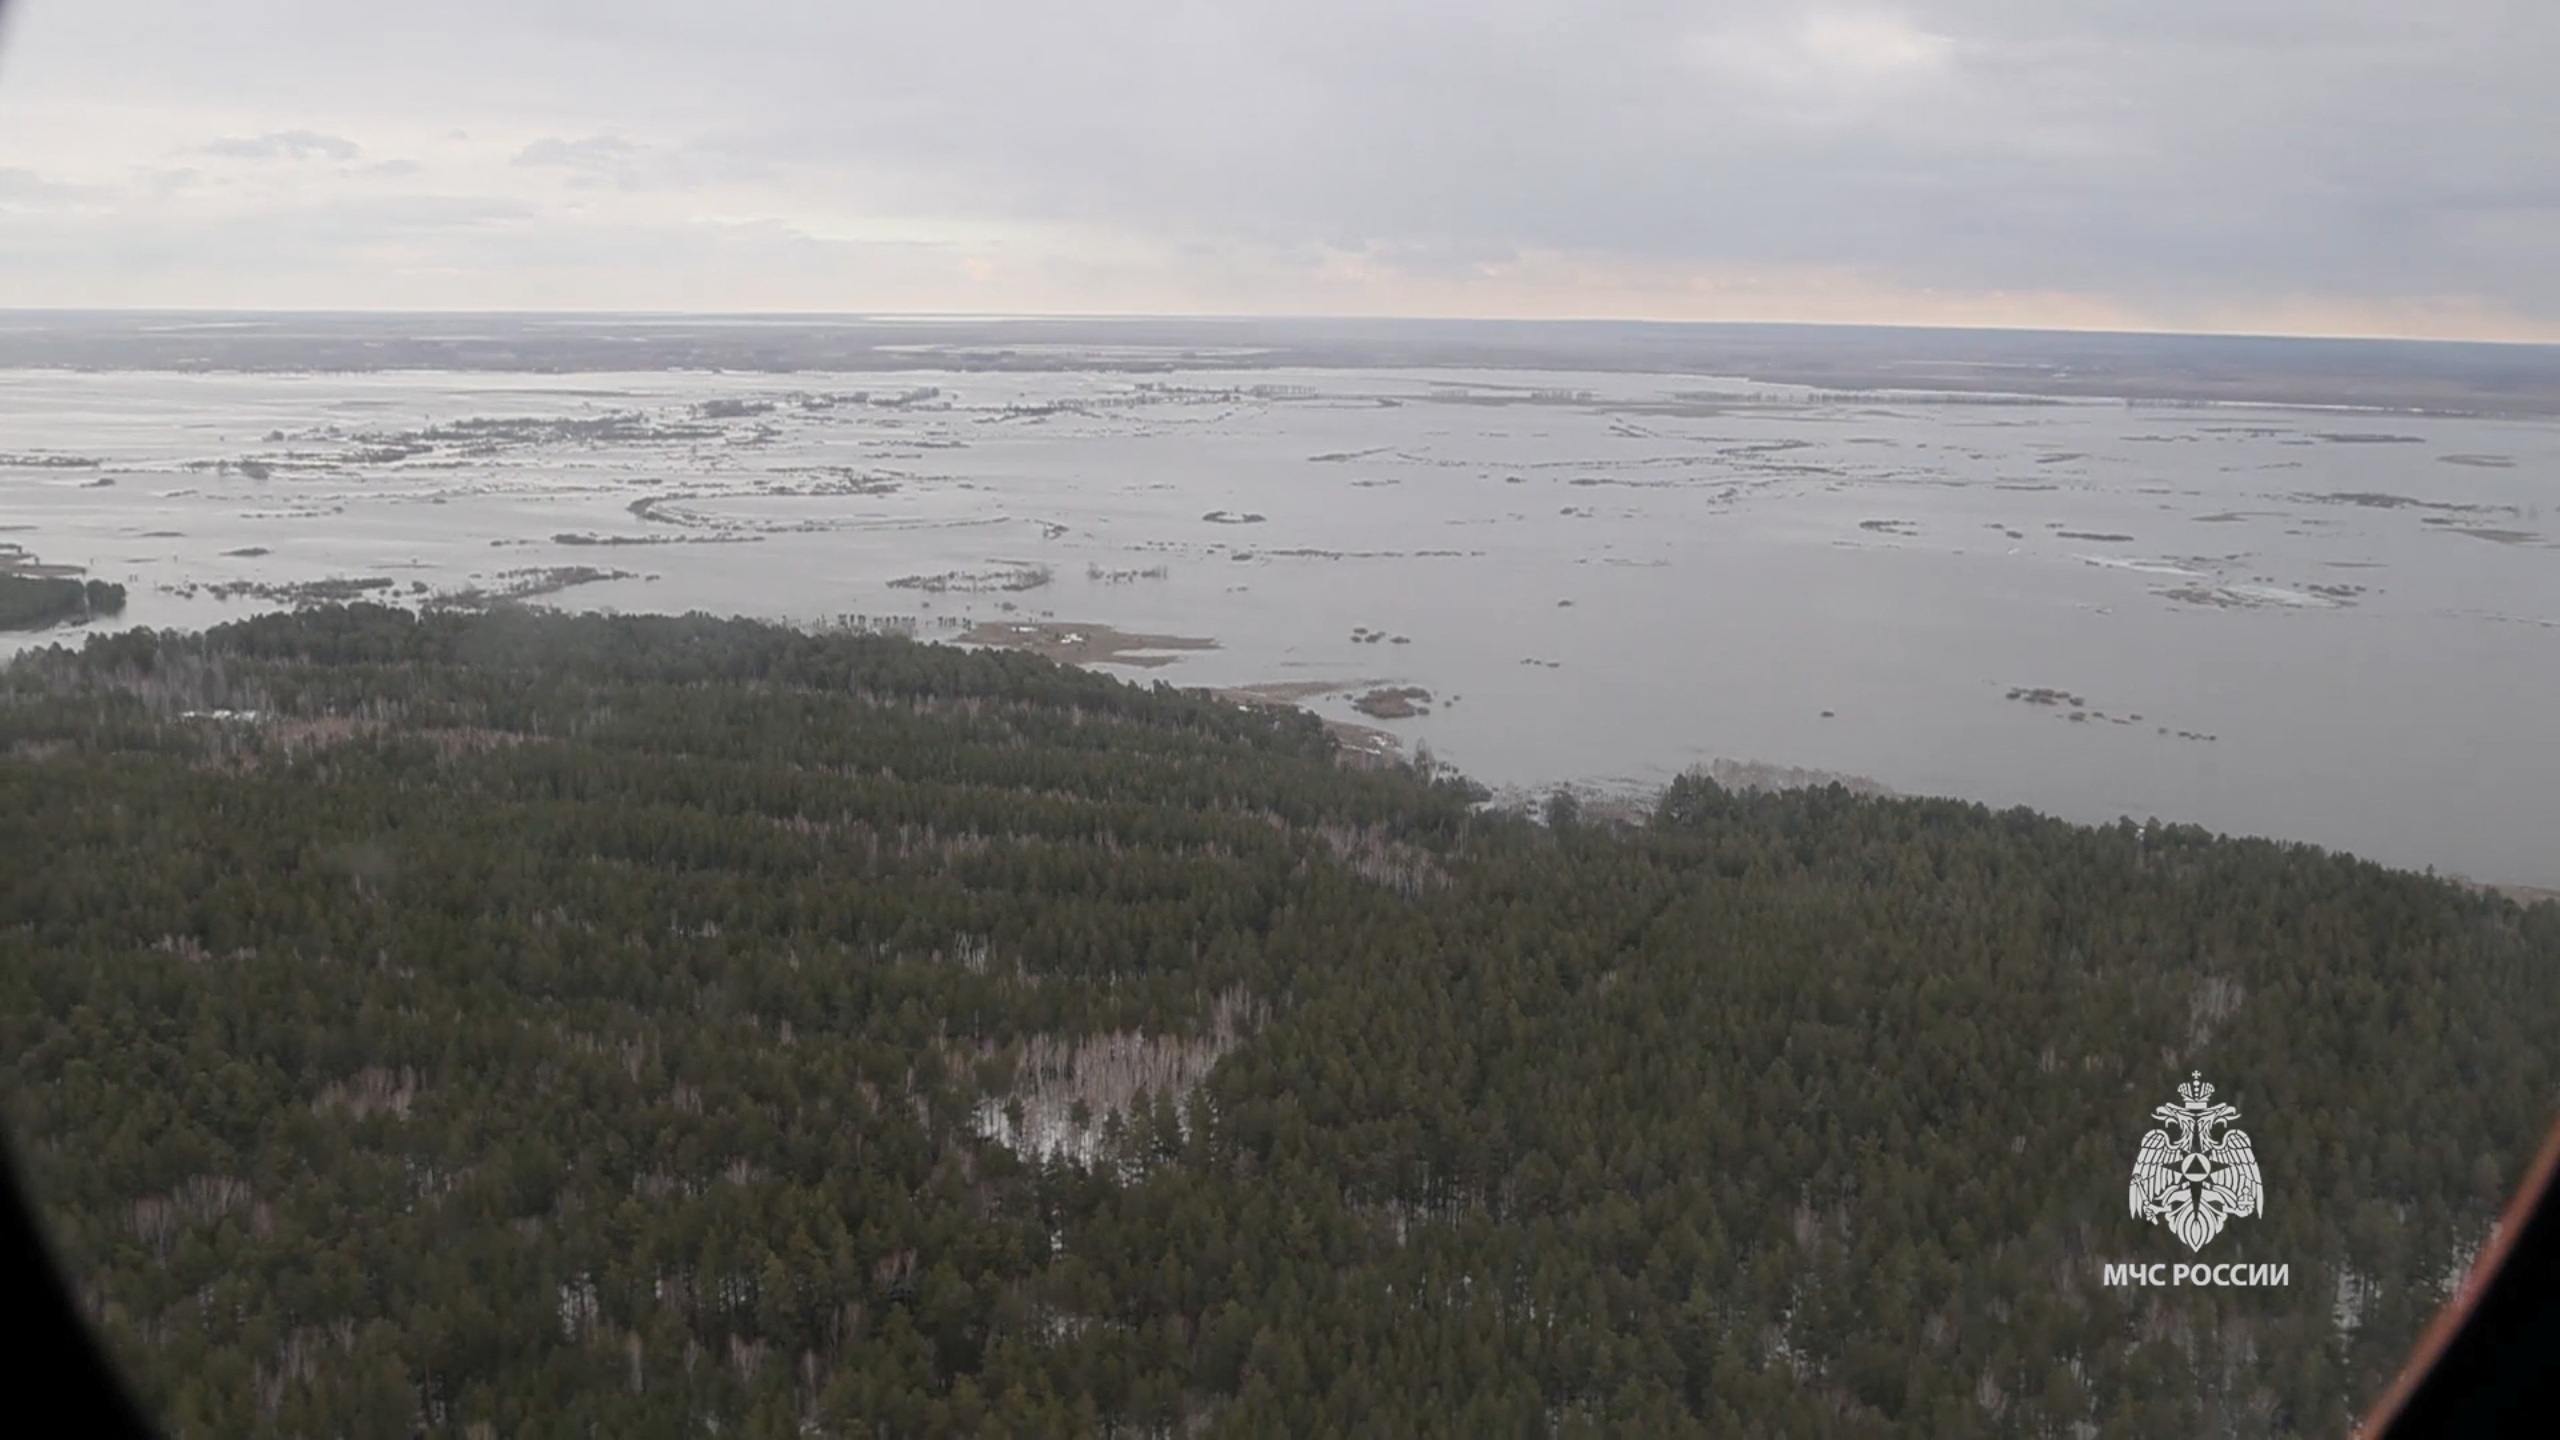 A view from a helicopter shows a flooded area in the Kurgan Region